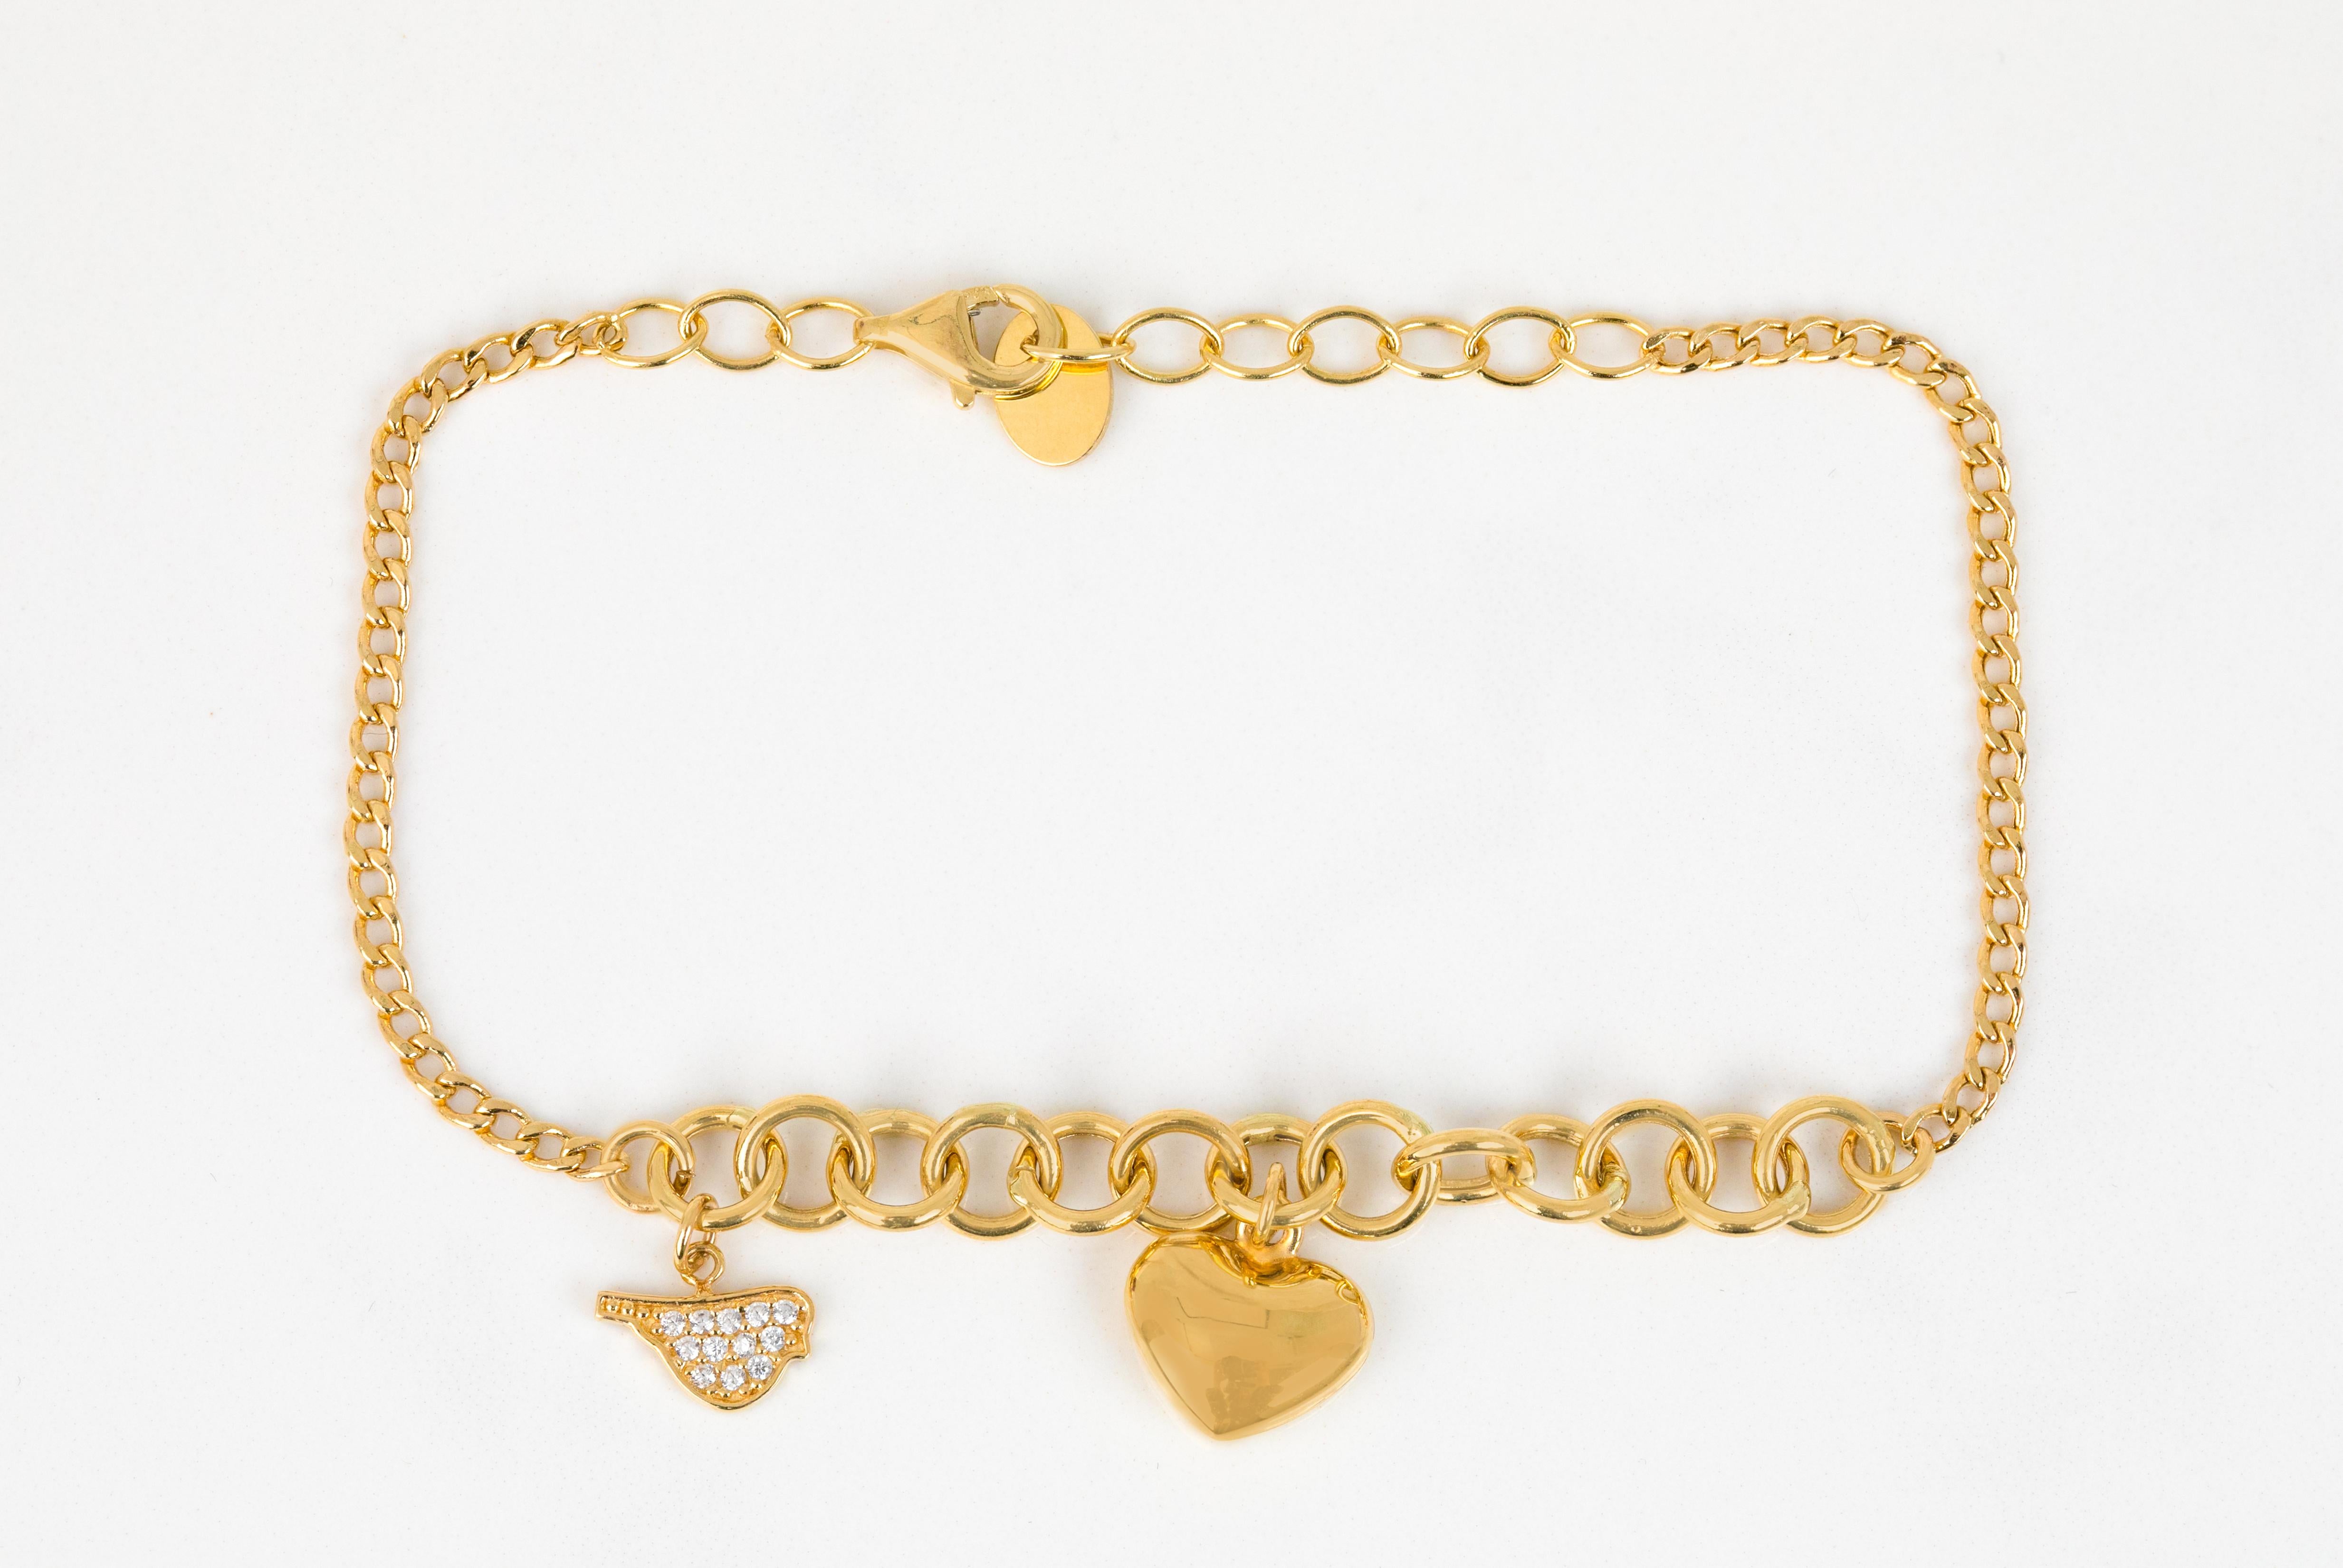 14k Gold Bracelet with Bold Chain, 14k Gold Chain and Heart Sembol Bracelet For Sale 7